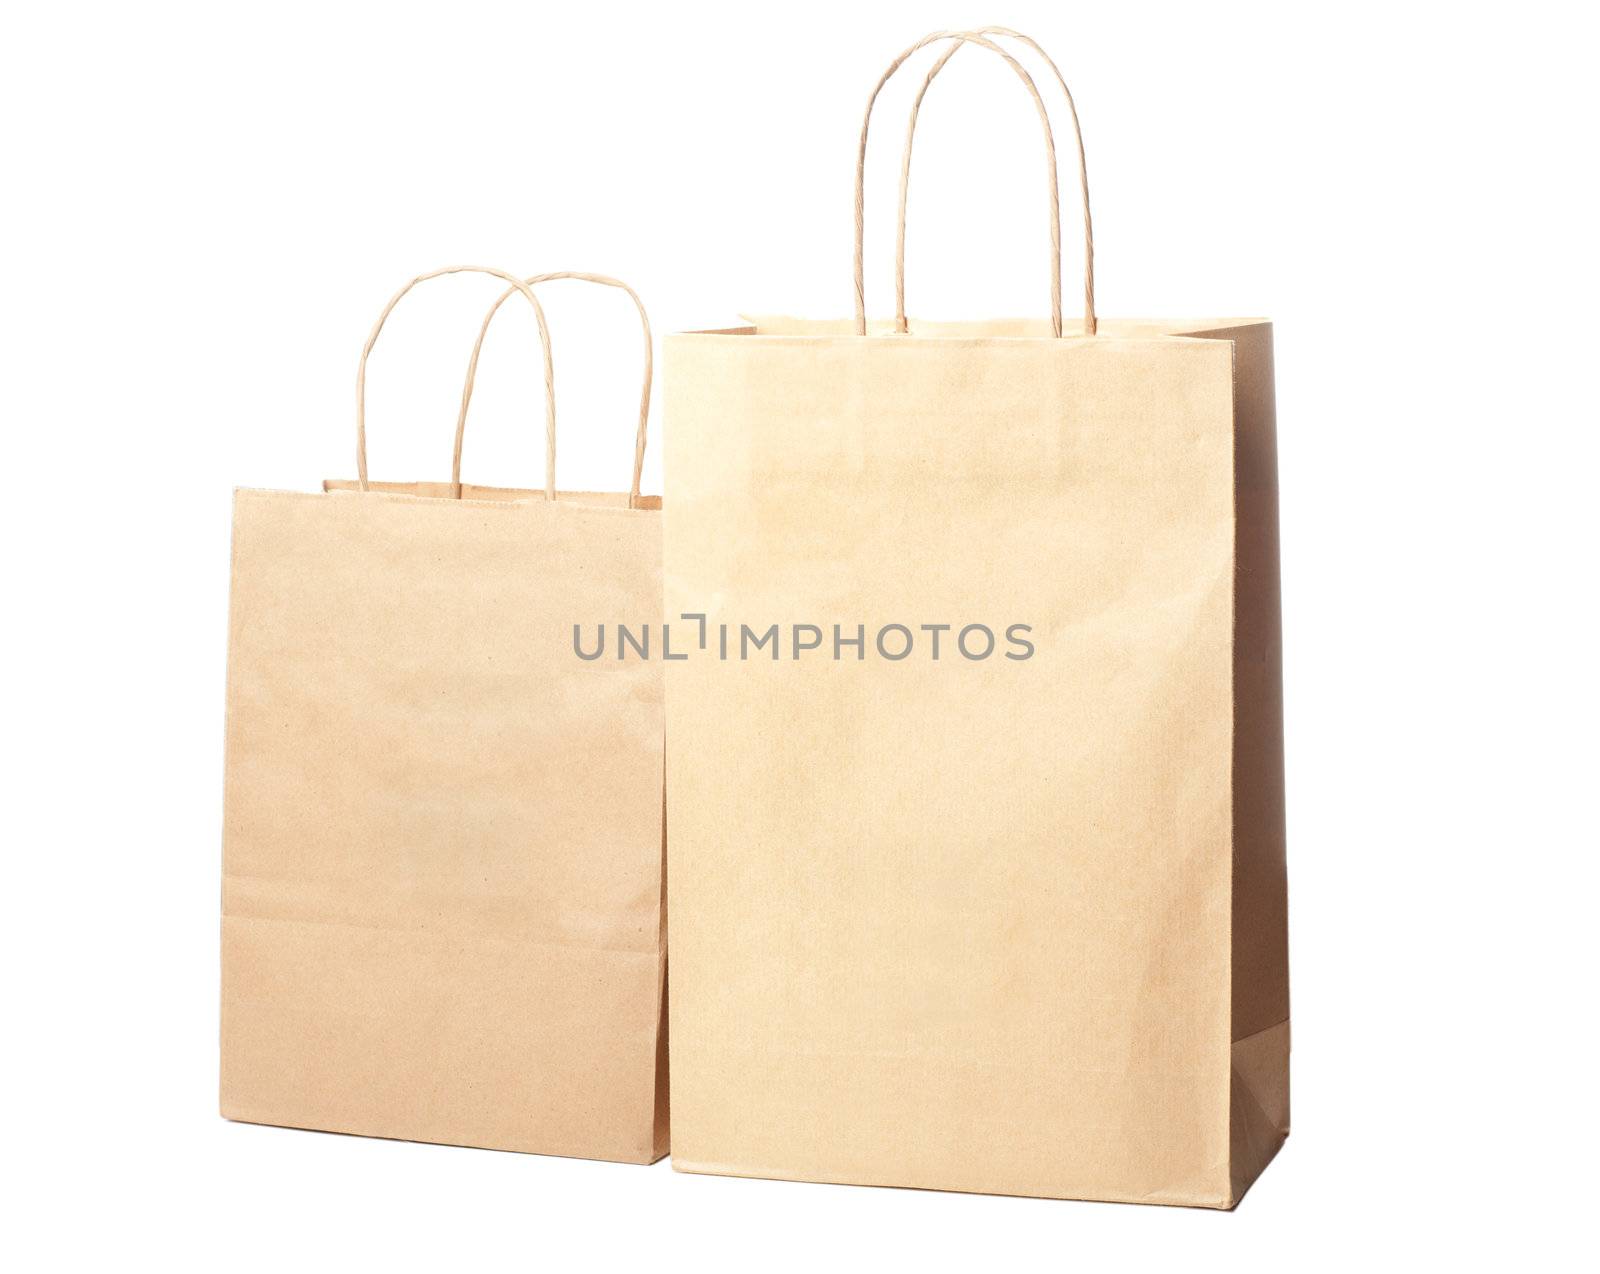 Two paper bags isolated over white background